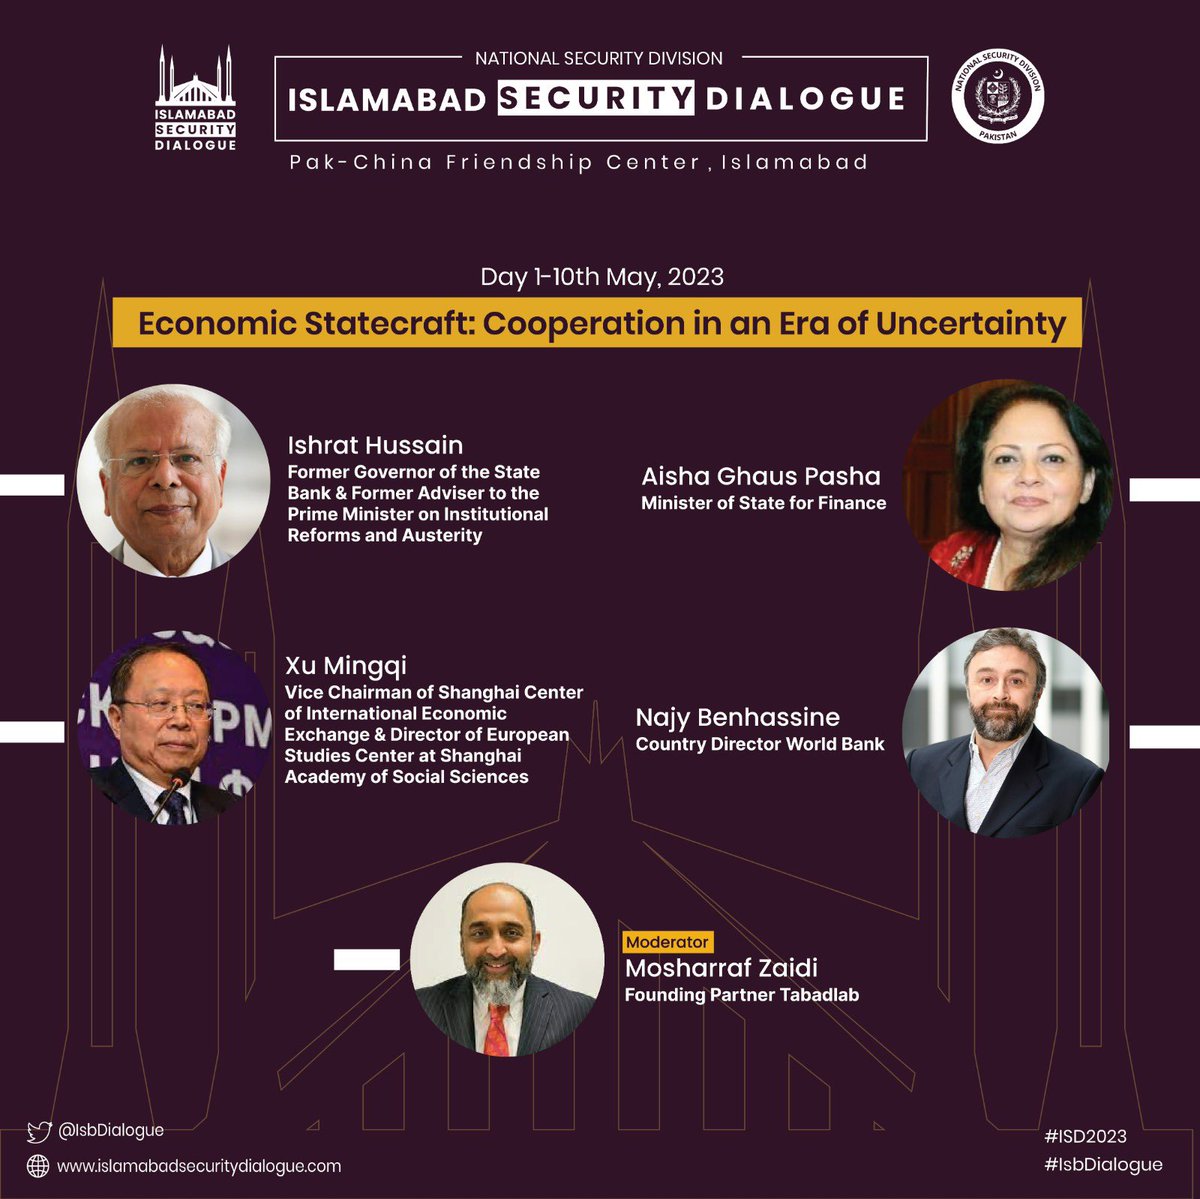 A session on economic statecraft was held on the 1st day of the 3rd #ISD2023. @mosharrafzaidi moderated the panel discussion with @AishaGPasha, @WBPakistanCD, Xu Mingqi, and Dr. Ishrat Hussain. Here is the link of the Session: m.youtube.com/watch?v=mXpWrz… #IsbDialogue #Economic